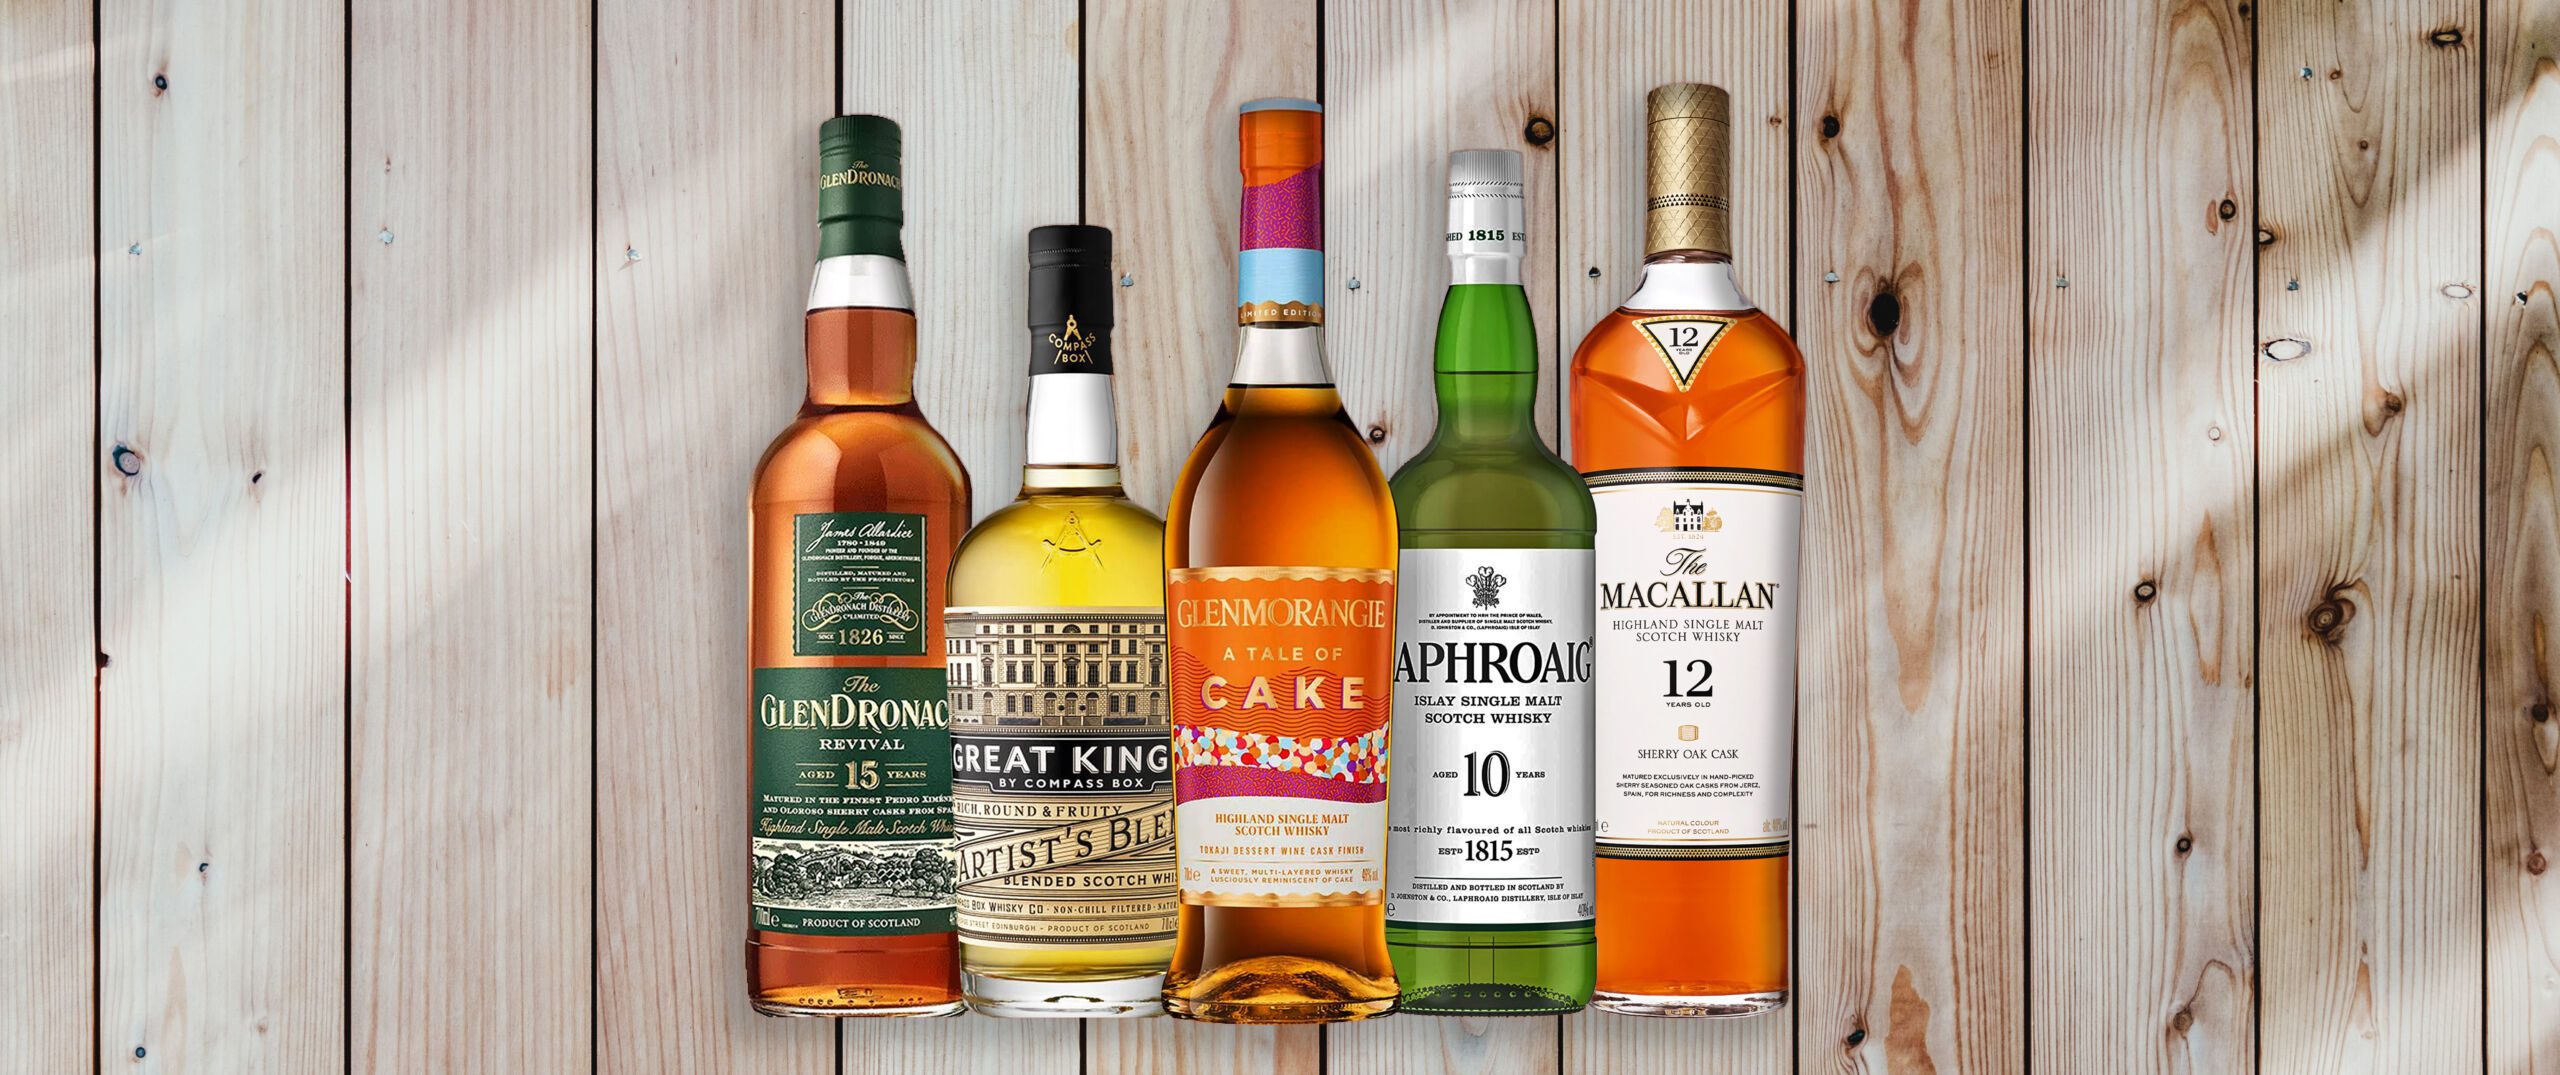 15 Underrated Scotch Whiskies You Need To Buy